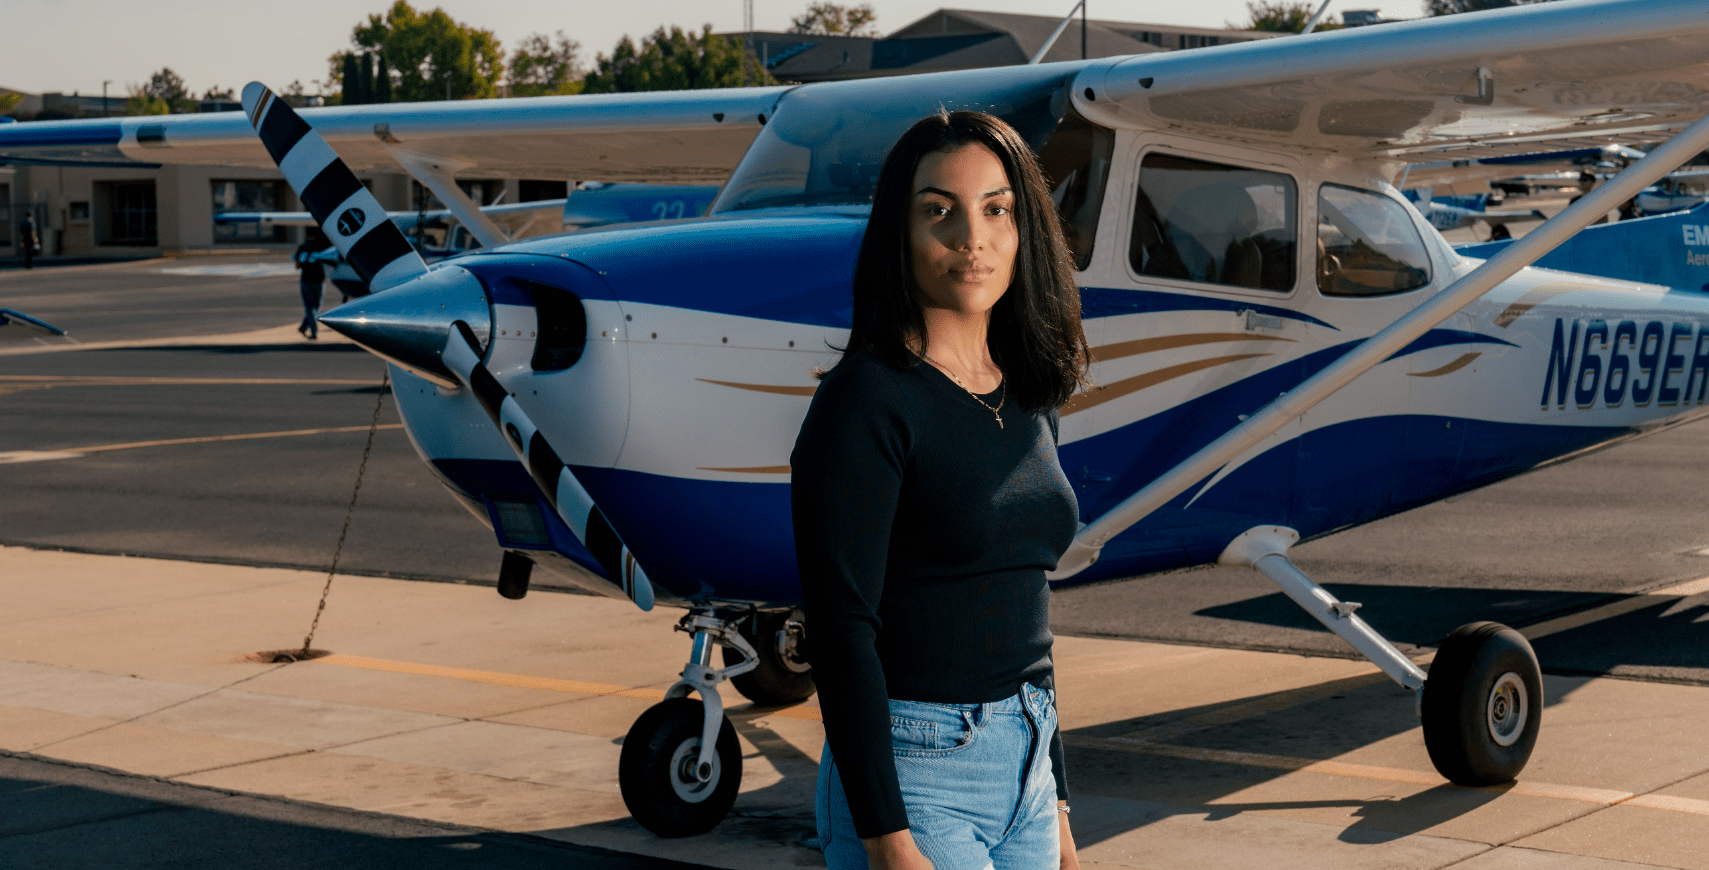 Boeing Scholar and Aeronautical Science major Kristy Magana (’27) posing on the Flight Line on the Prescott Campus. (Photo: Embry-Riddle / Connor McShane)  